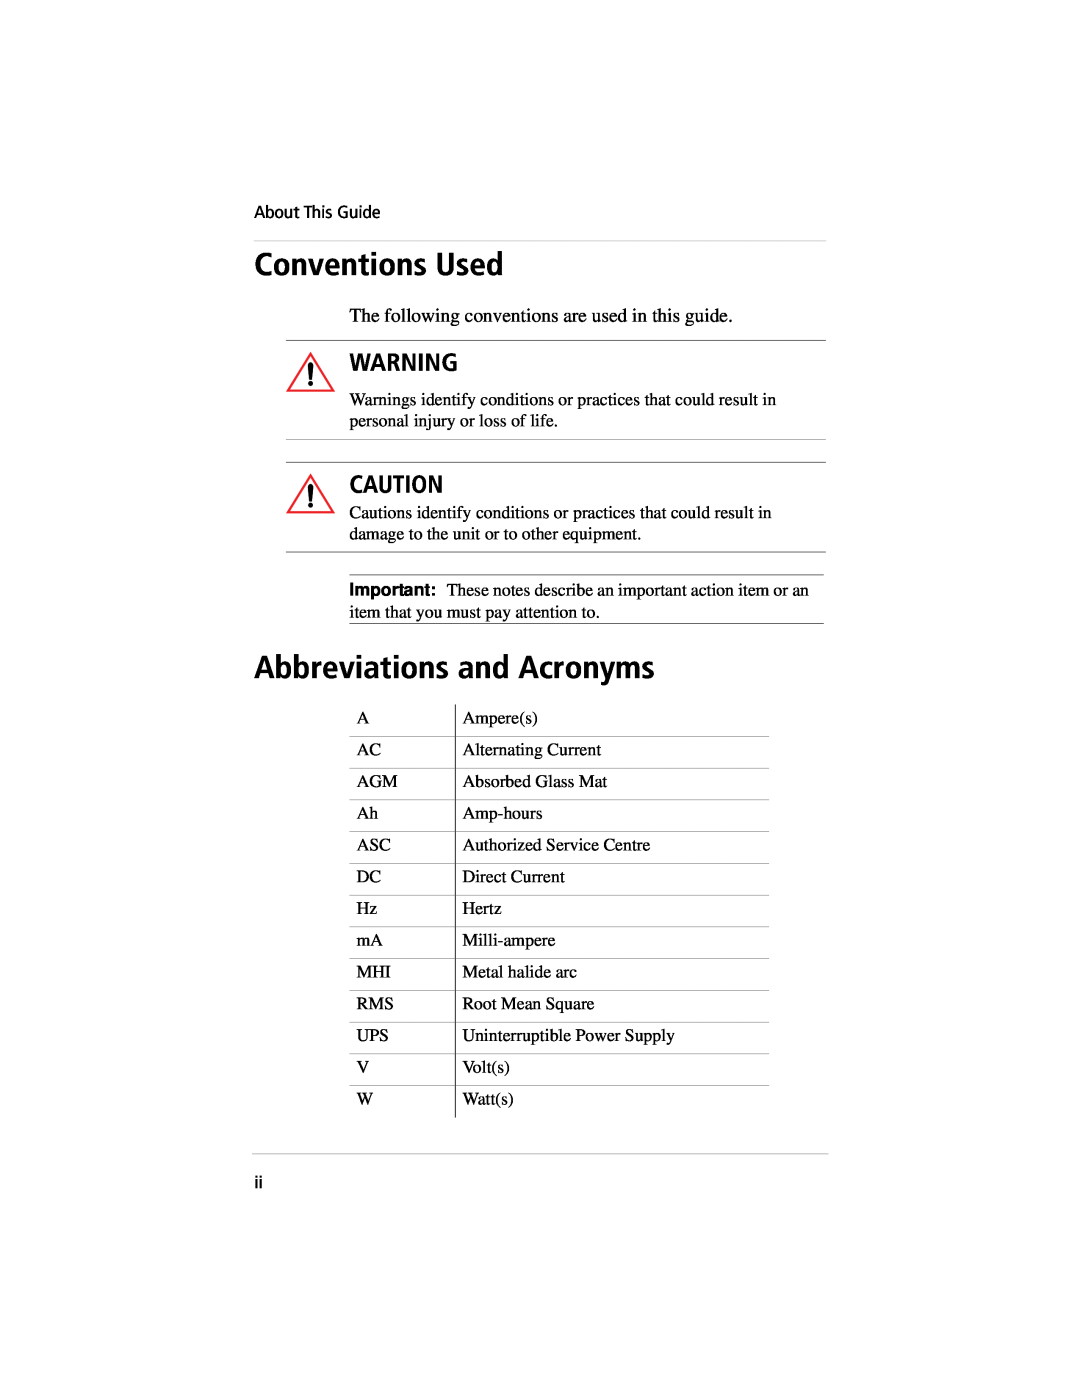 Xantrex Technology 800, 400 Conventions Used, Abbreviations and Acronyms, The following conventions are used in this guide 